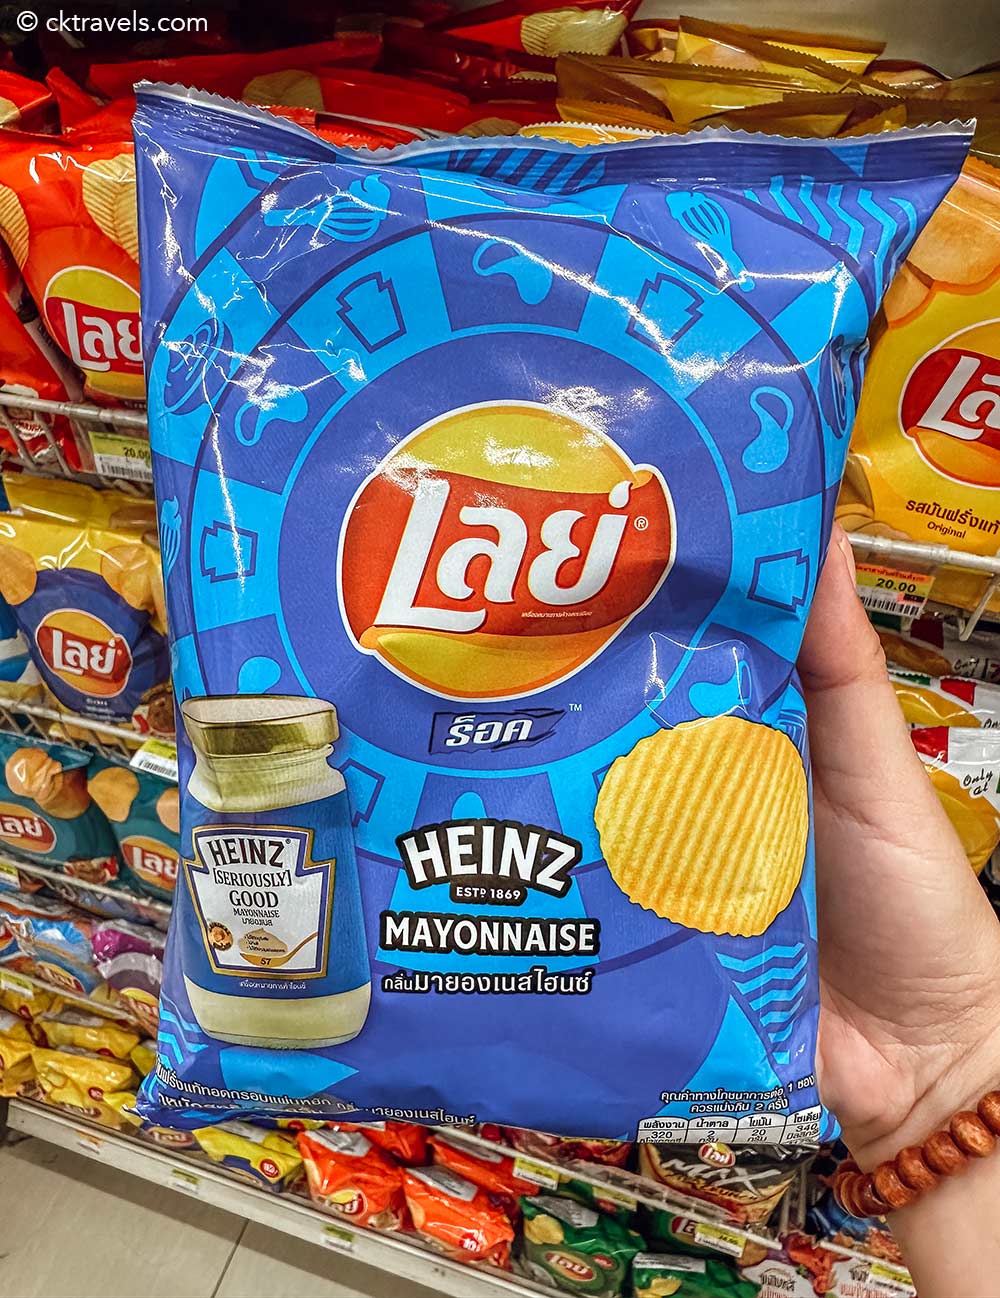 Heinz Mayonnaise Lay’s Potato Chips 7-Eleven Thailand